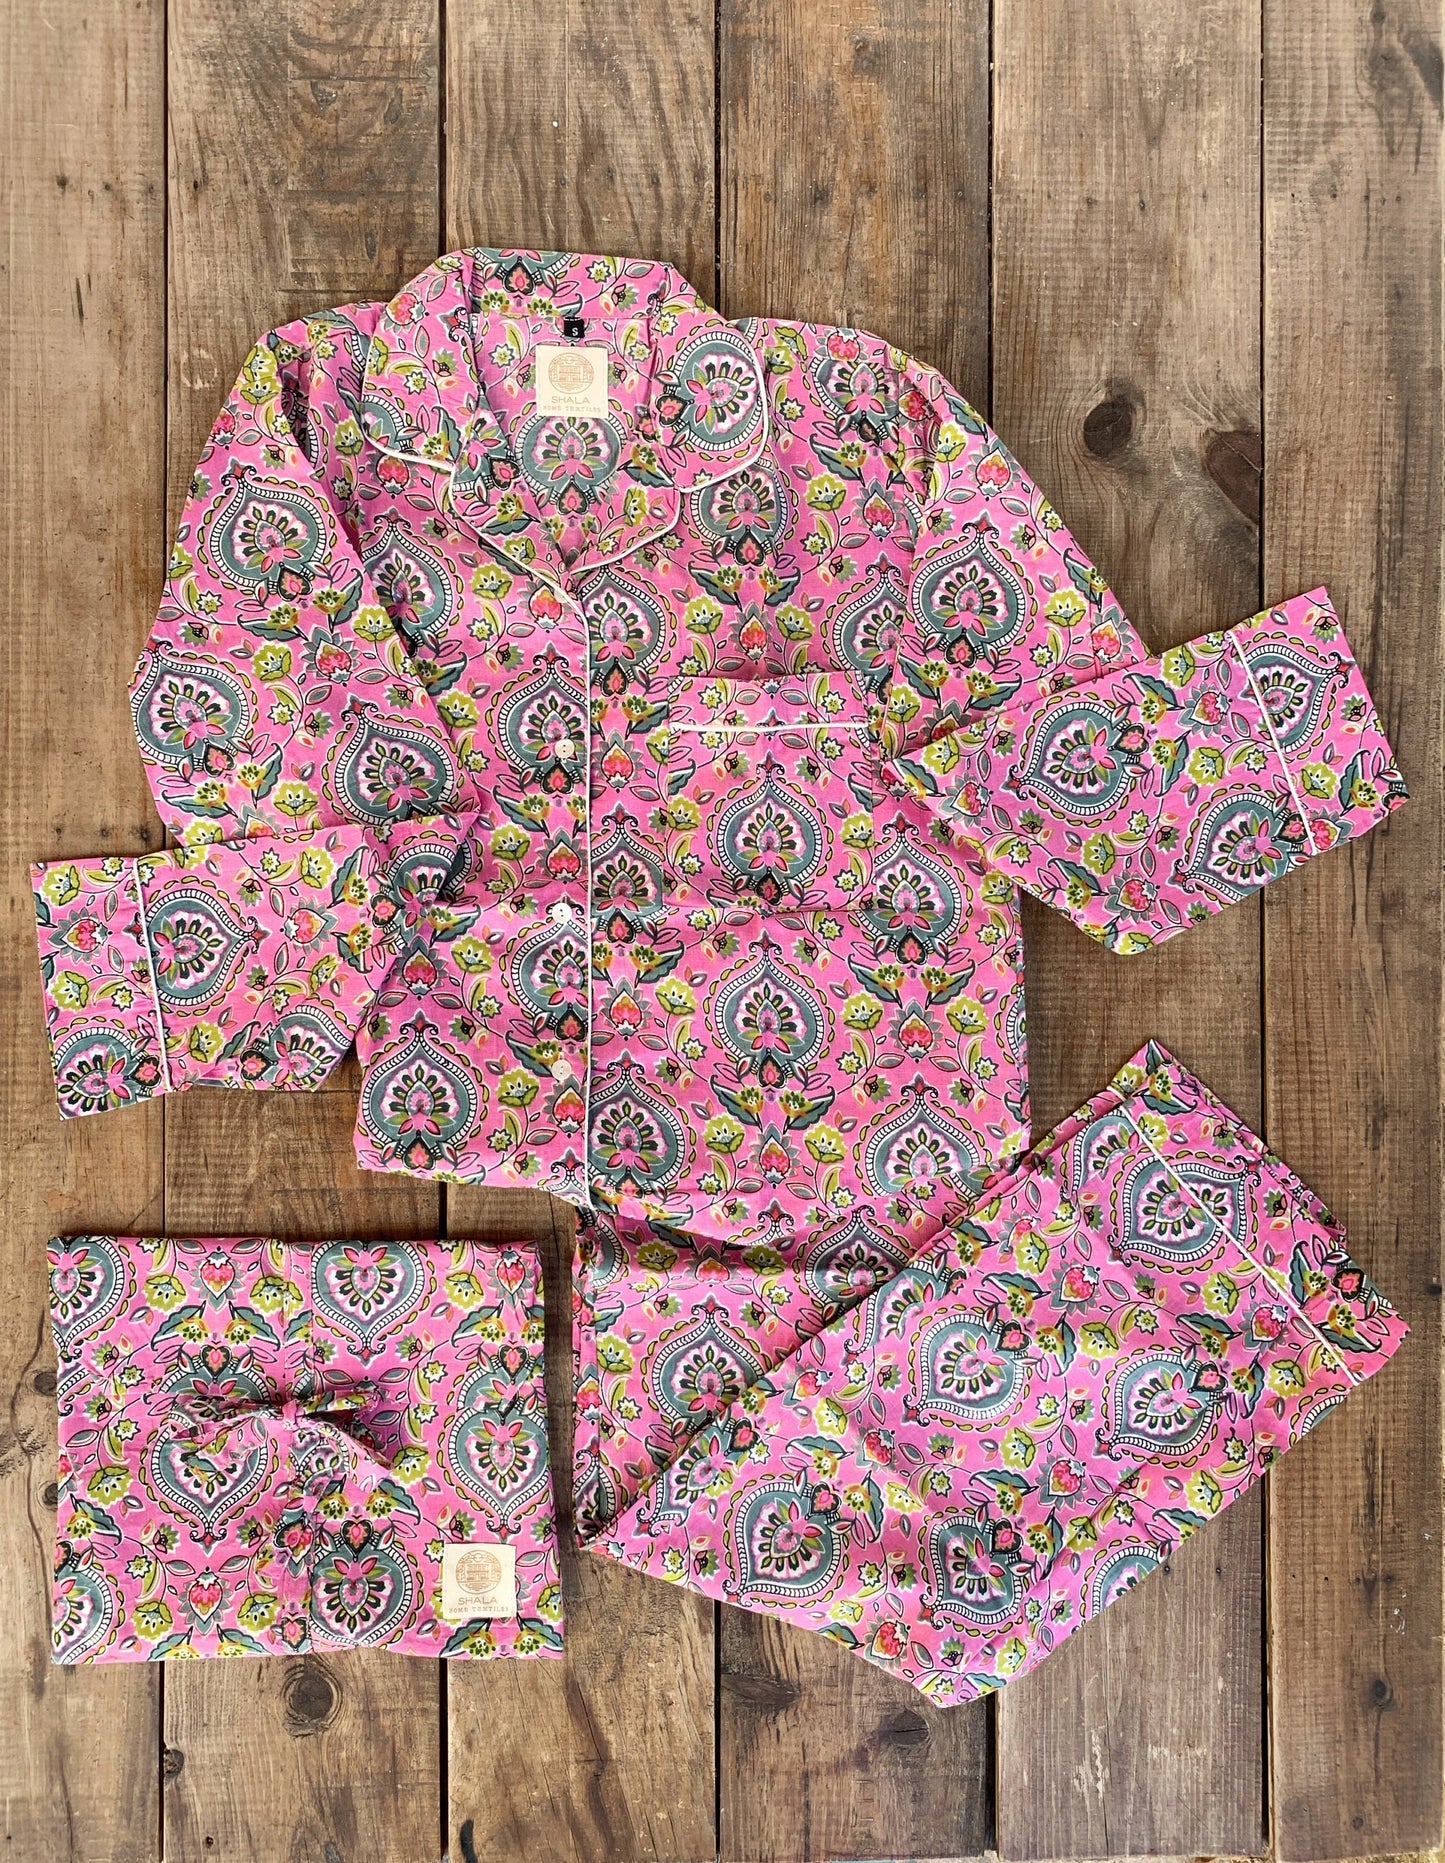 Long-sleeved pajamas and pants · Pure cotton block print handmade in India · 100% cotton winter pajamas · Pink green flowers